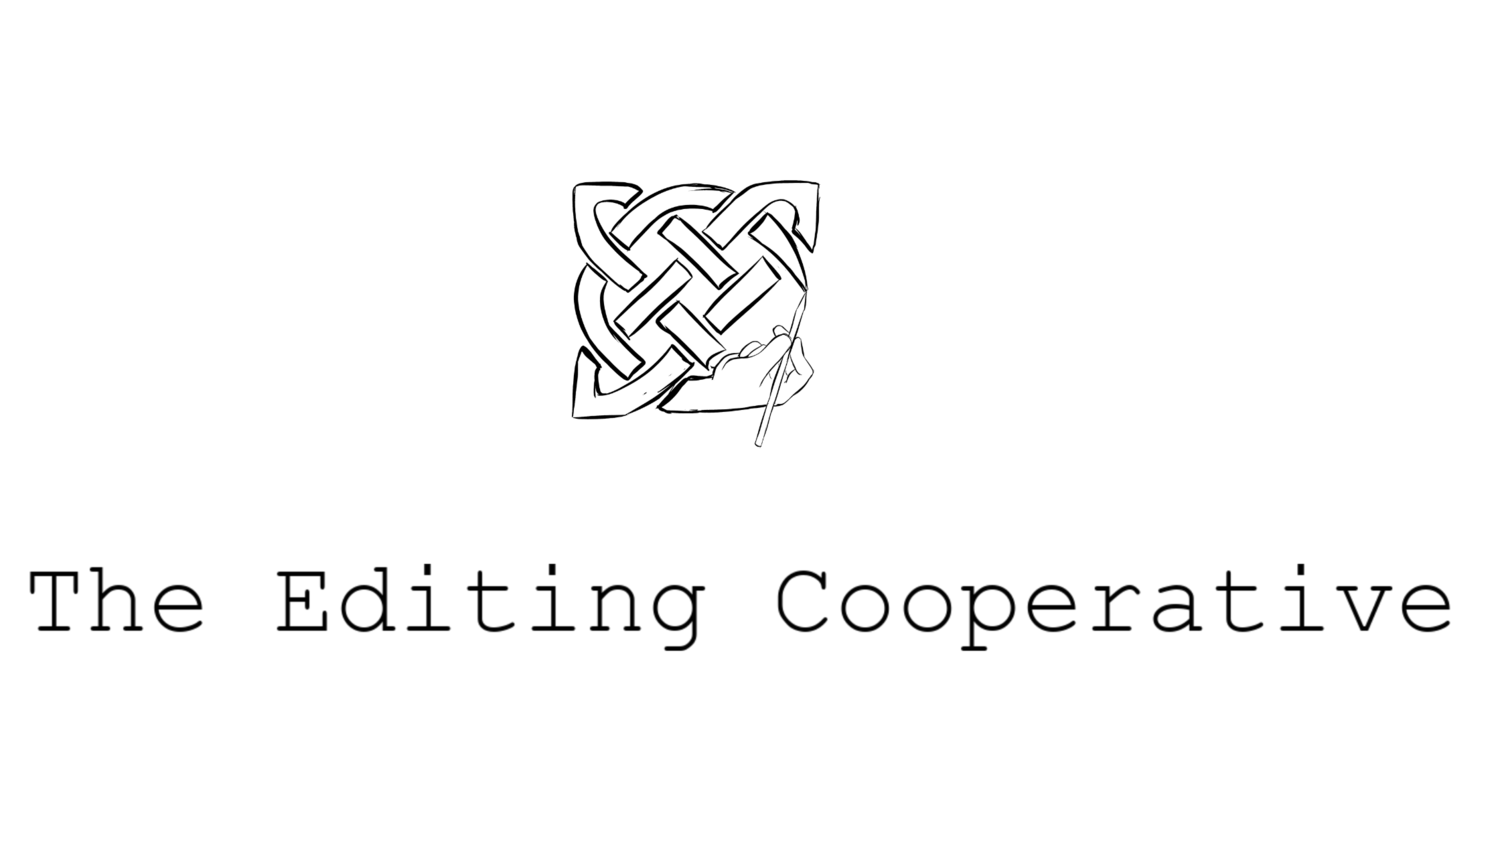 The Editing Cooperative